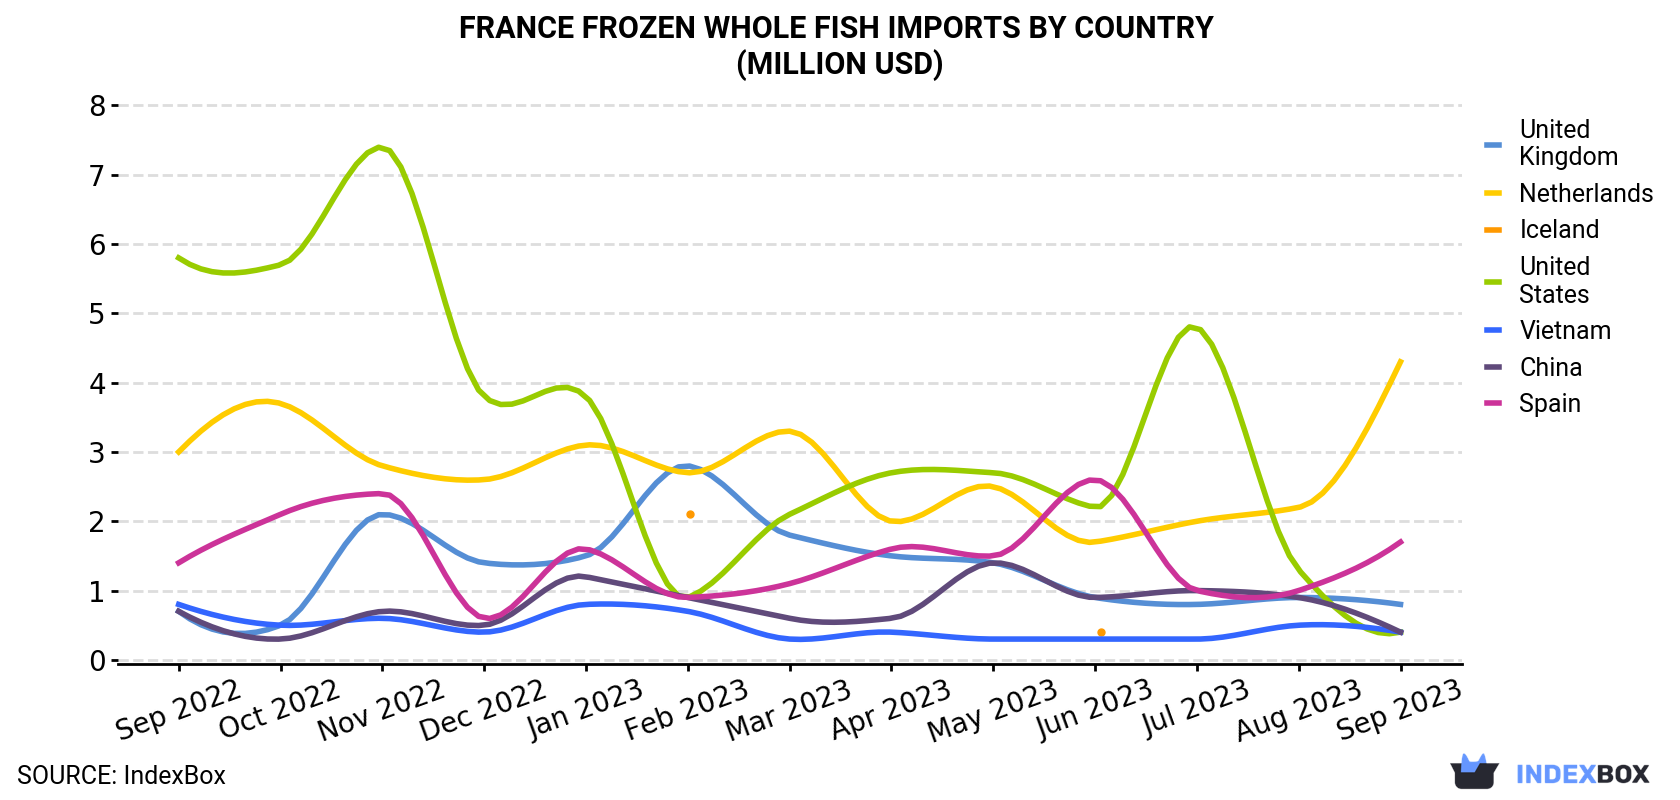 France Frozen Whole Fish Imports By Country (Million USD)